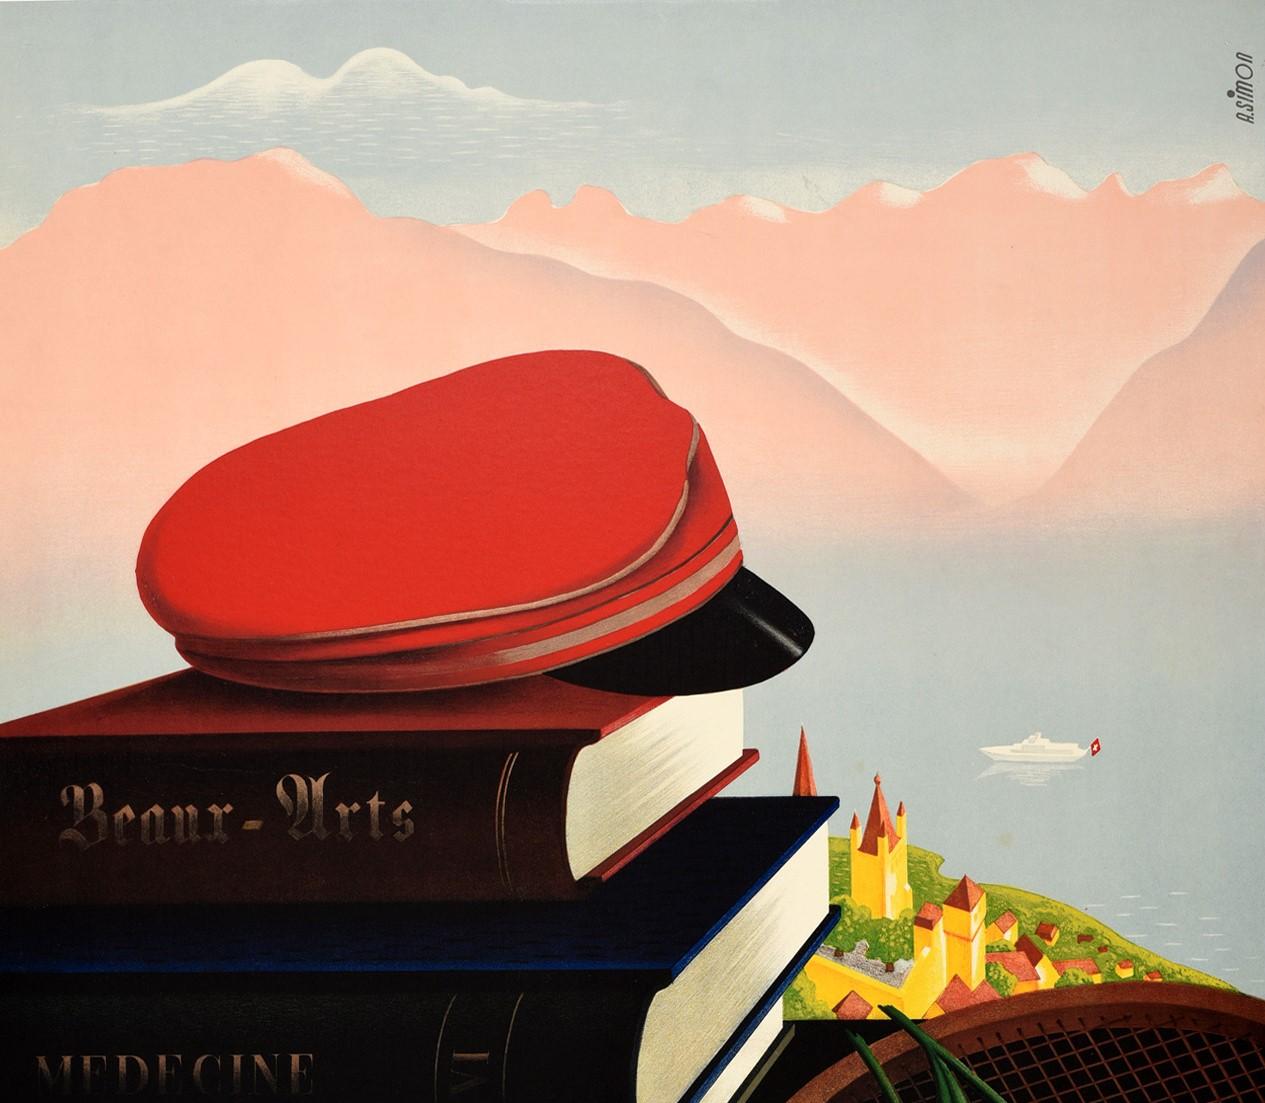 Original vintage poster advertising travel to the Cite de la Jeunesse Youth City of Lausanne Ouchy Switzerland featuring a pile of educational books entitled Beaux Arts, Medecine and Lettres under a CAP next to a wooden tennis racket with daisy